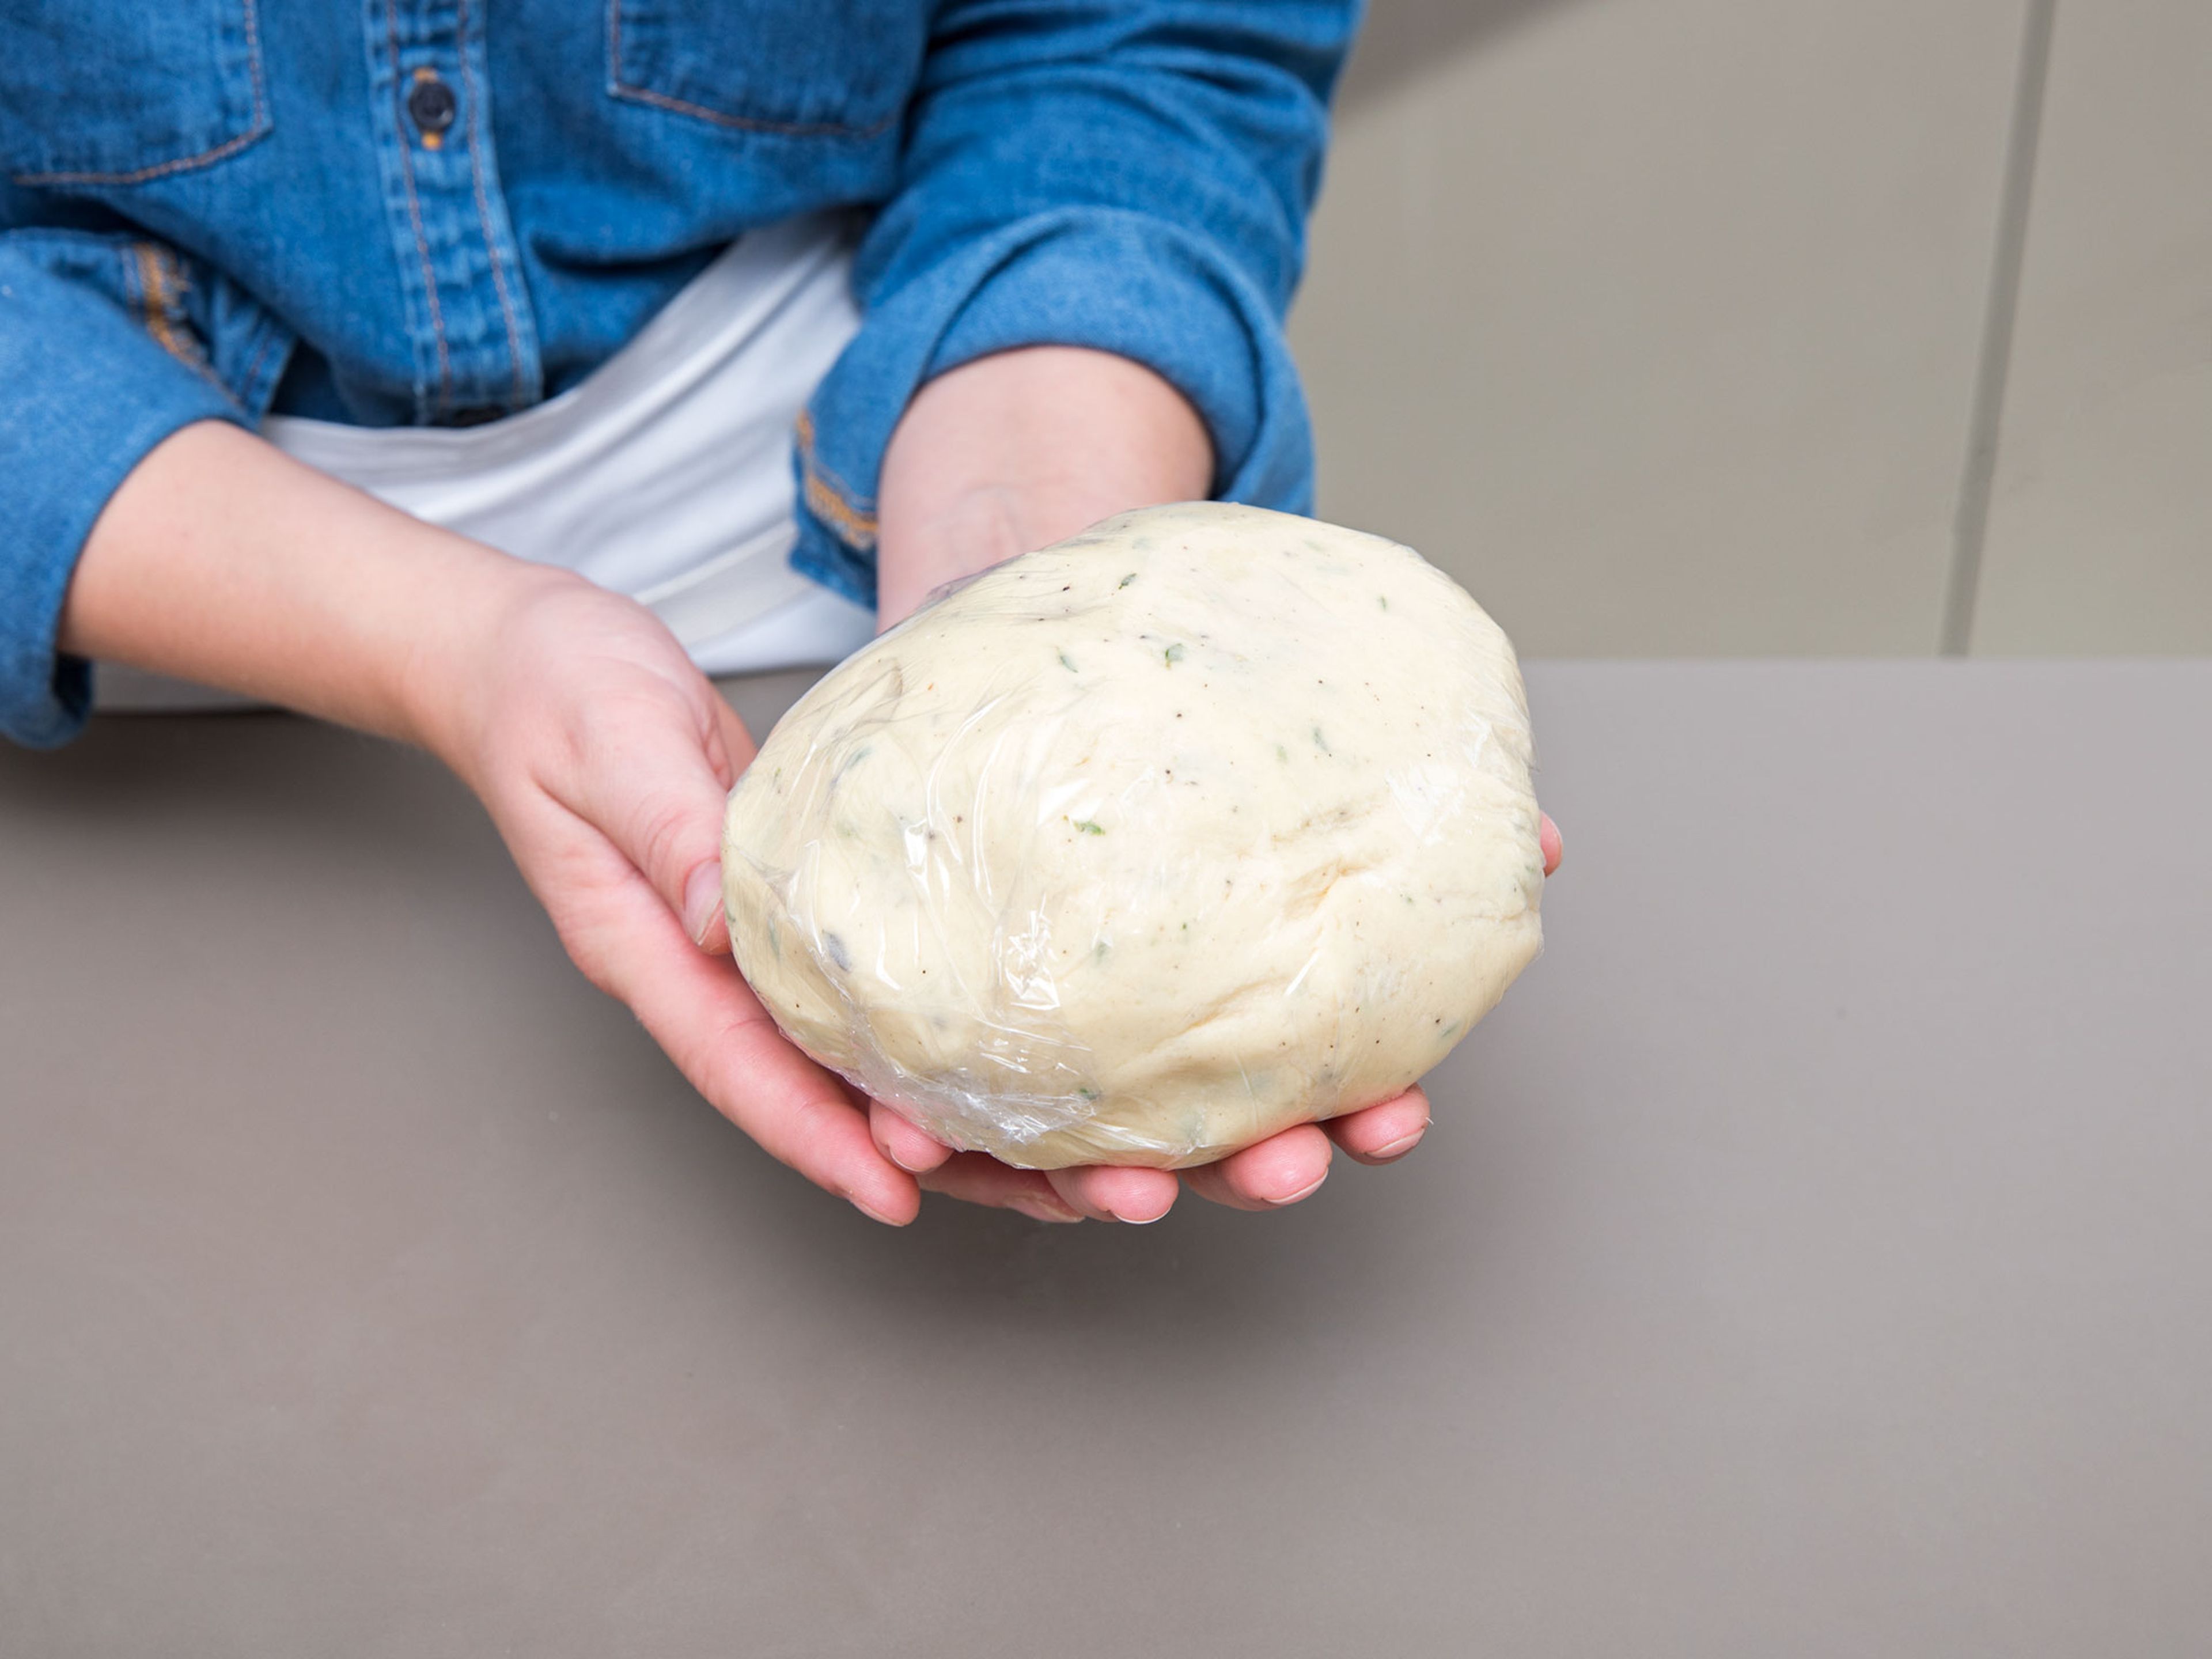 Knead the dough with your hands until smooth, then wrap the dough in plastic wrap and refrigerate for approx. 30 min.